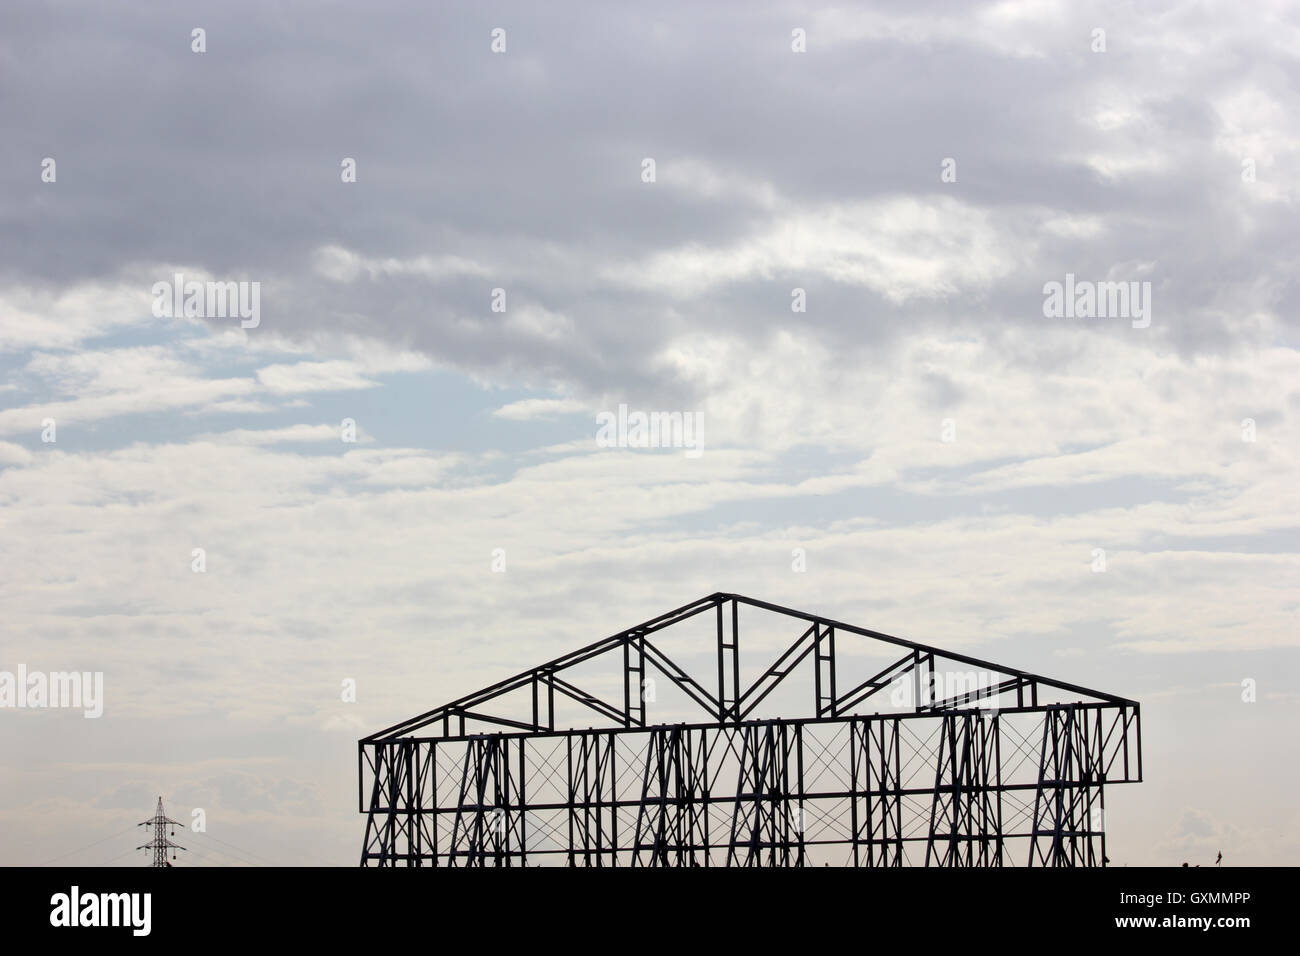 metal structure against a cloudy sky Stock Photo